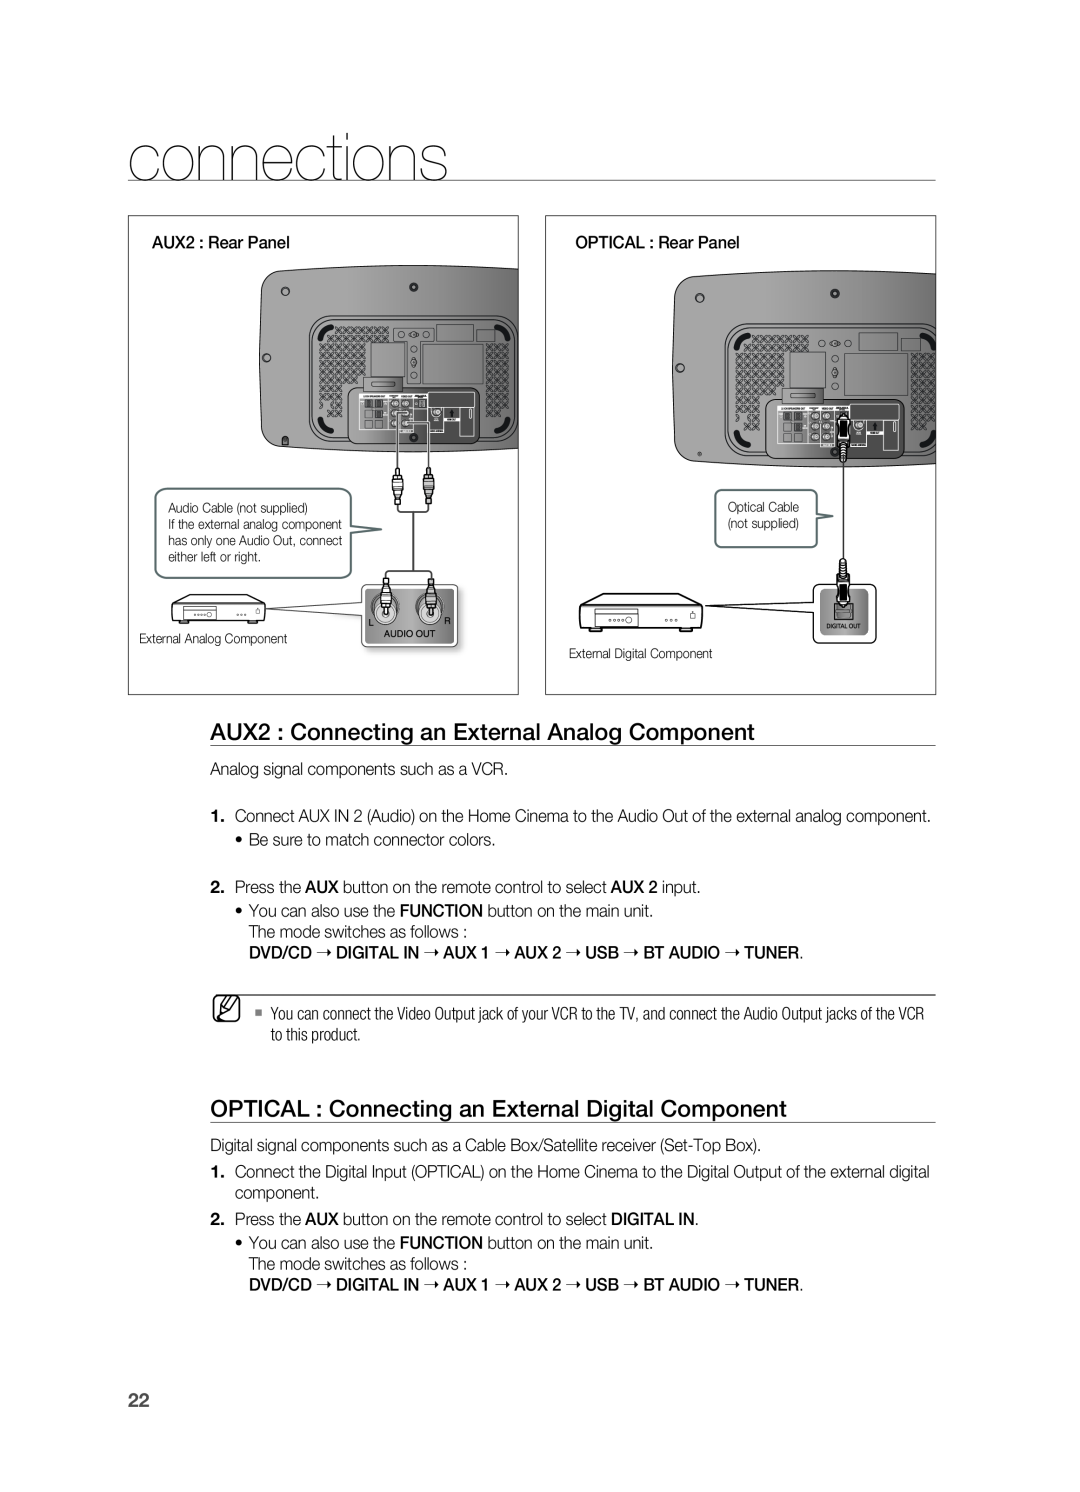 Samsung HT-X710 user manual AUX2 Connecting an External Analog Component, connections 